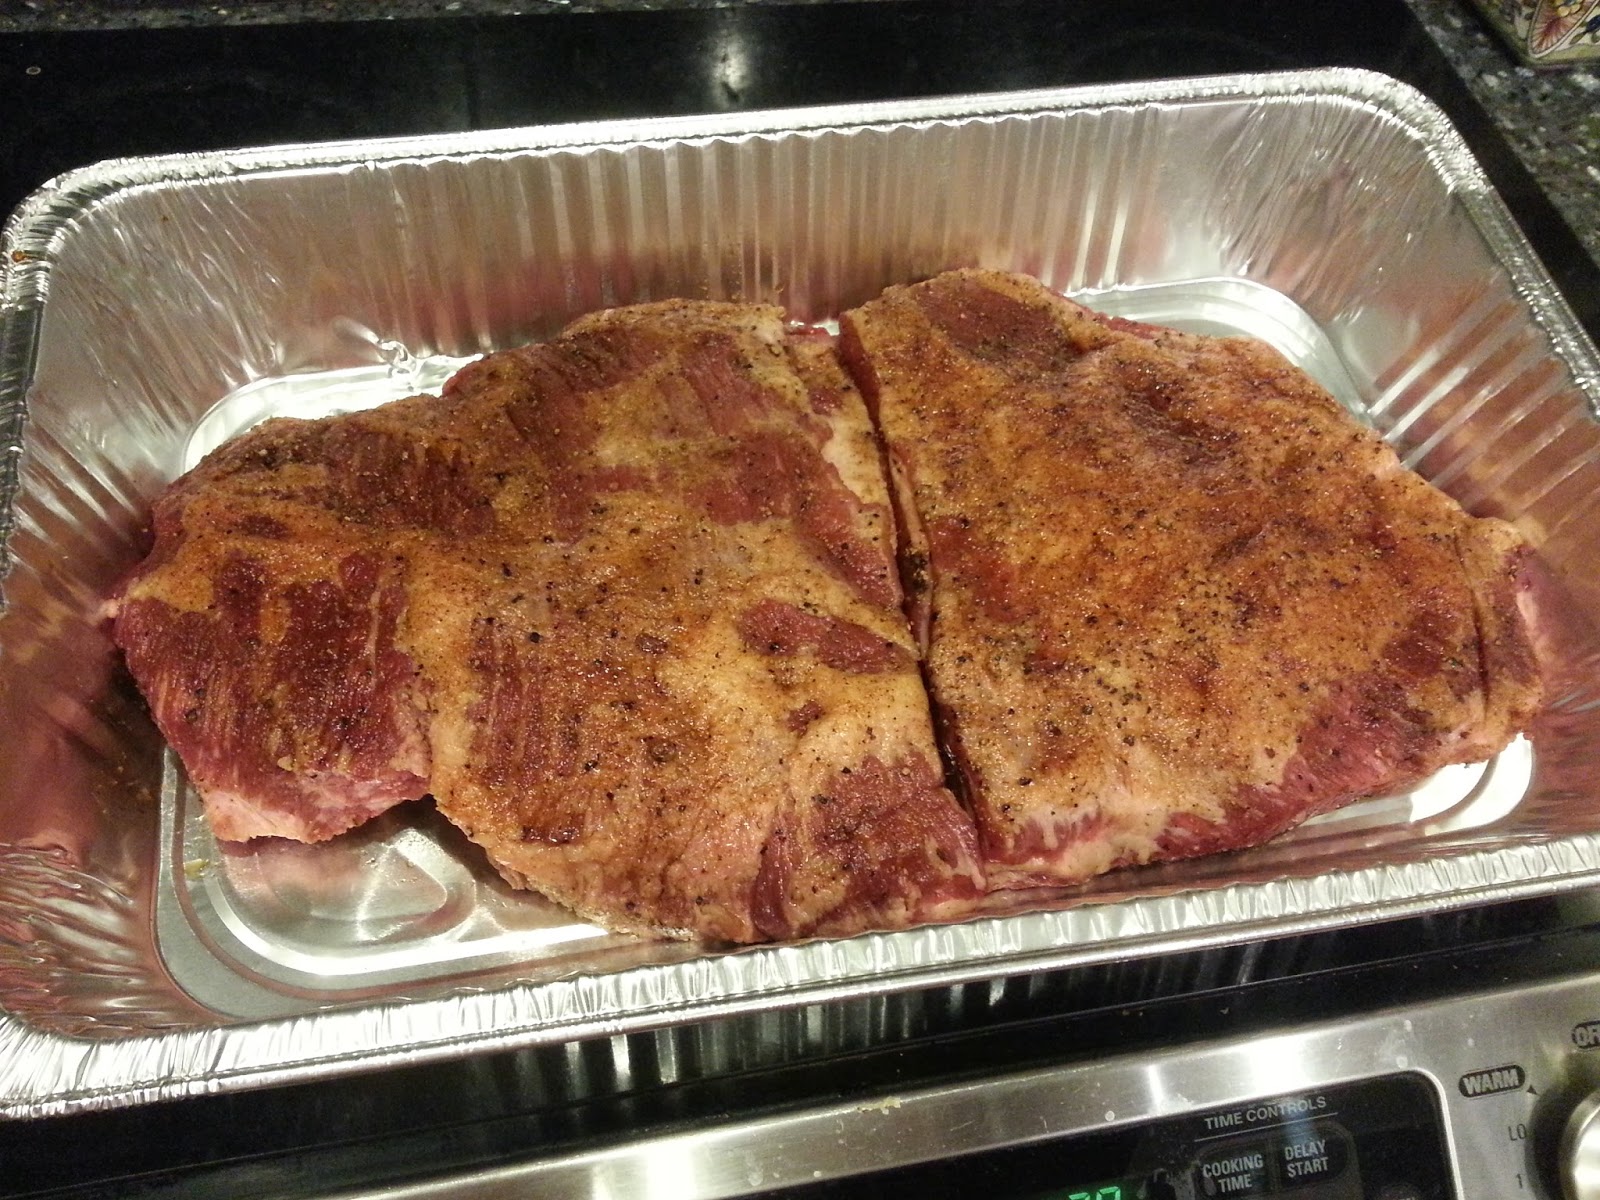 gourmet-librarian-s-food-blog-first-time-brisket-on-new-masterbuilt